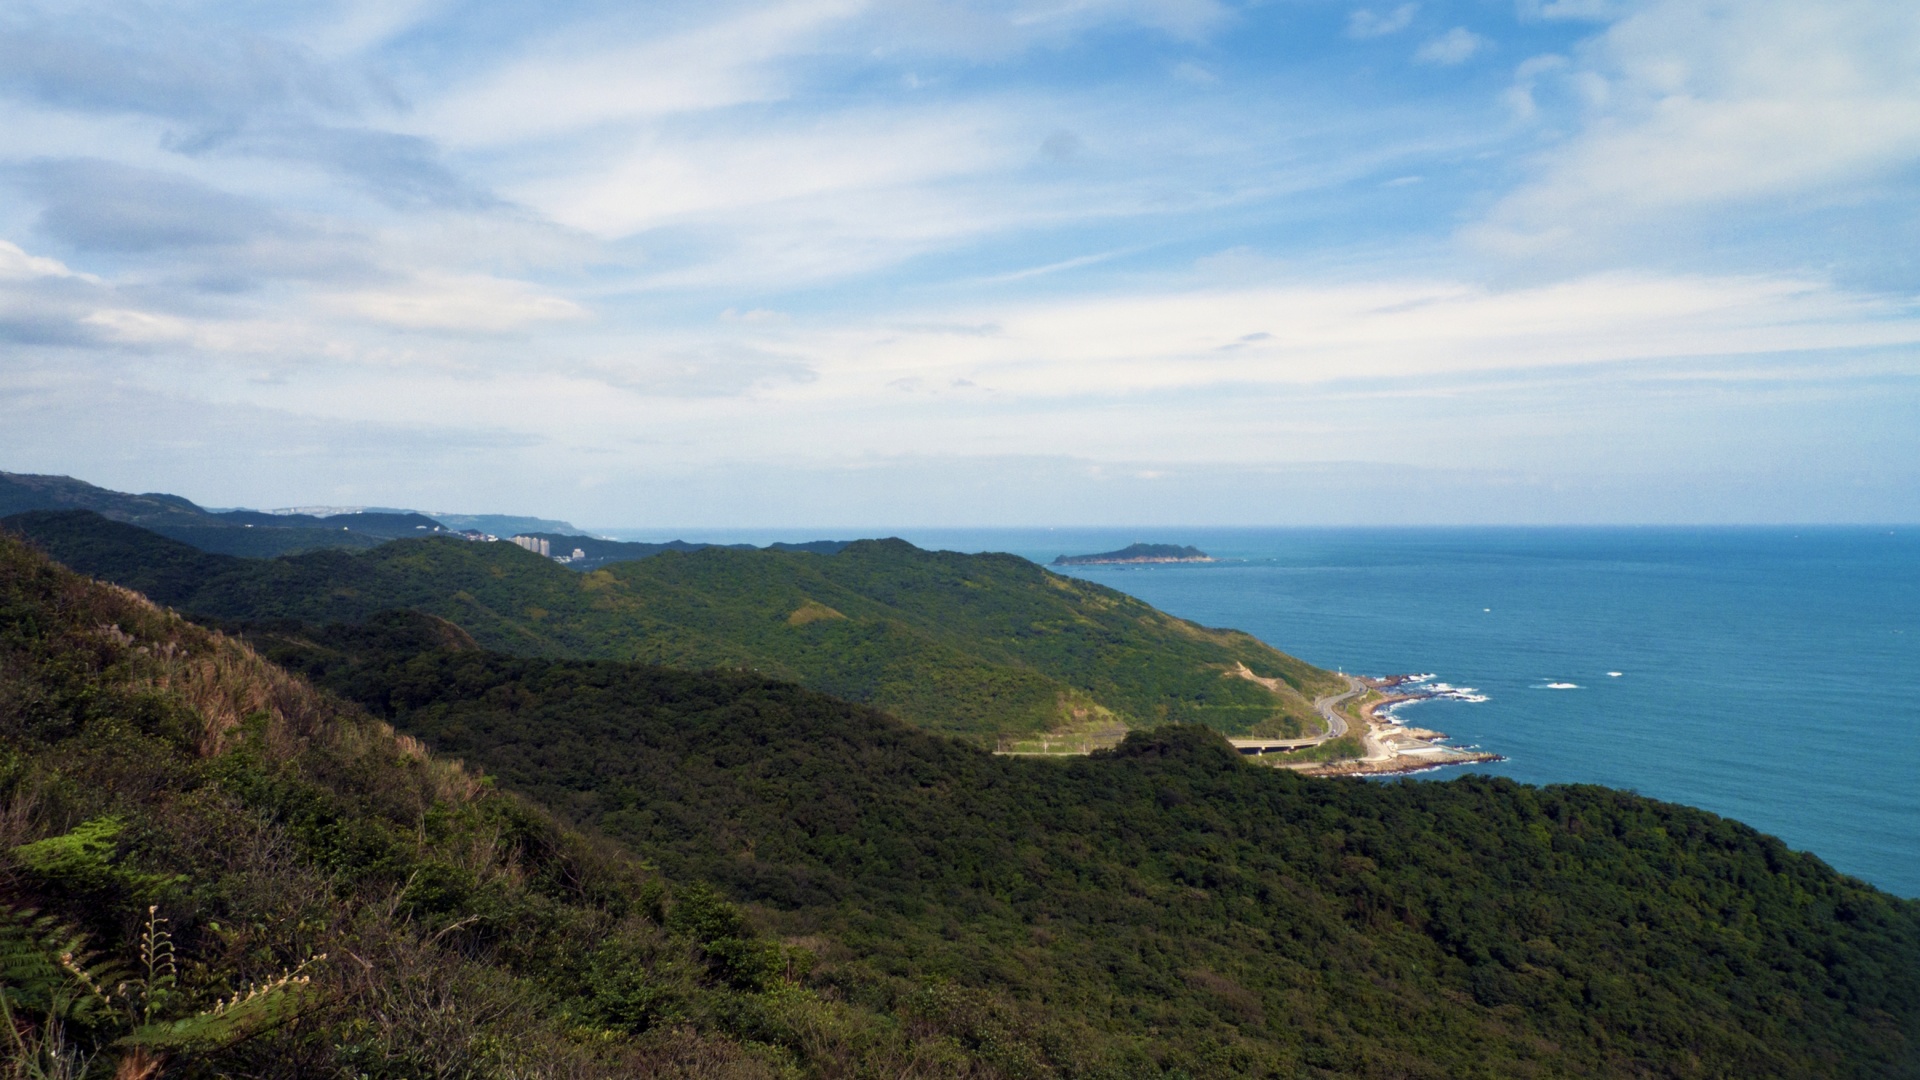 The North-east coast of Taiwan at Wanli, looking in the direction of Jinshan